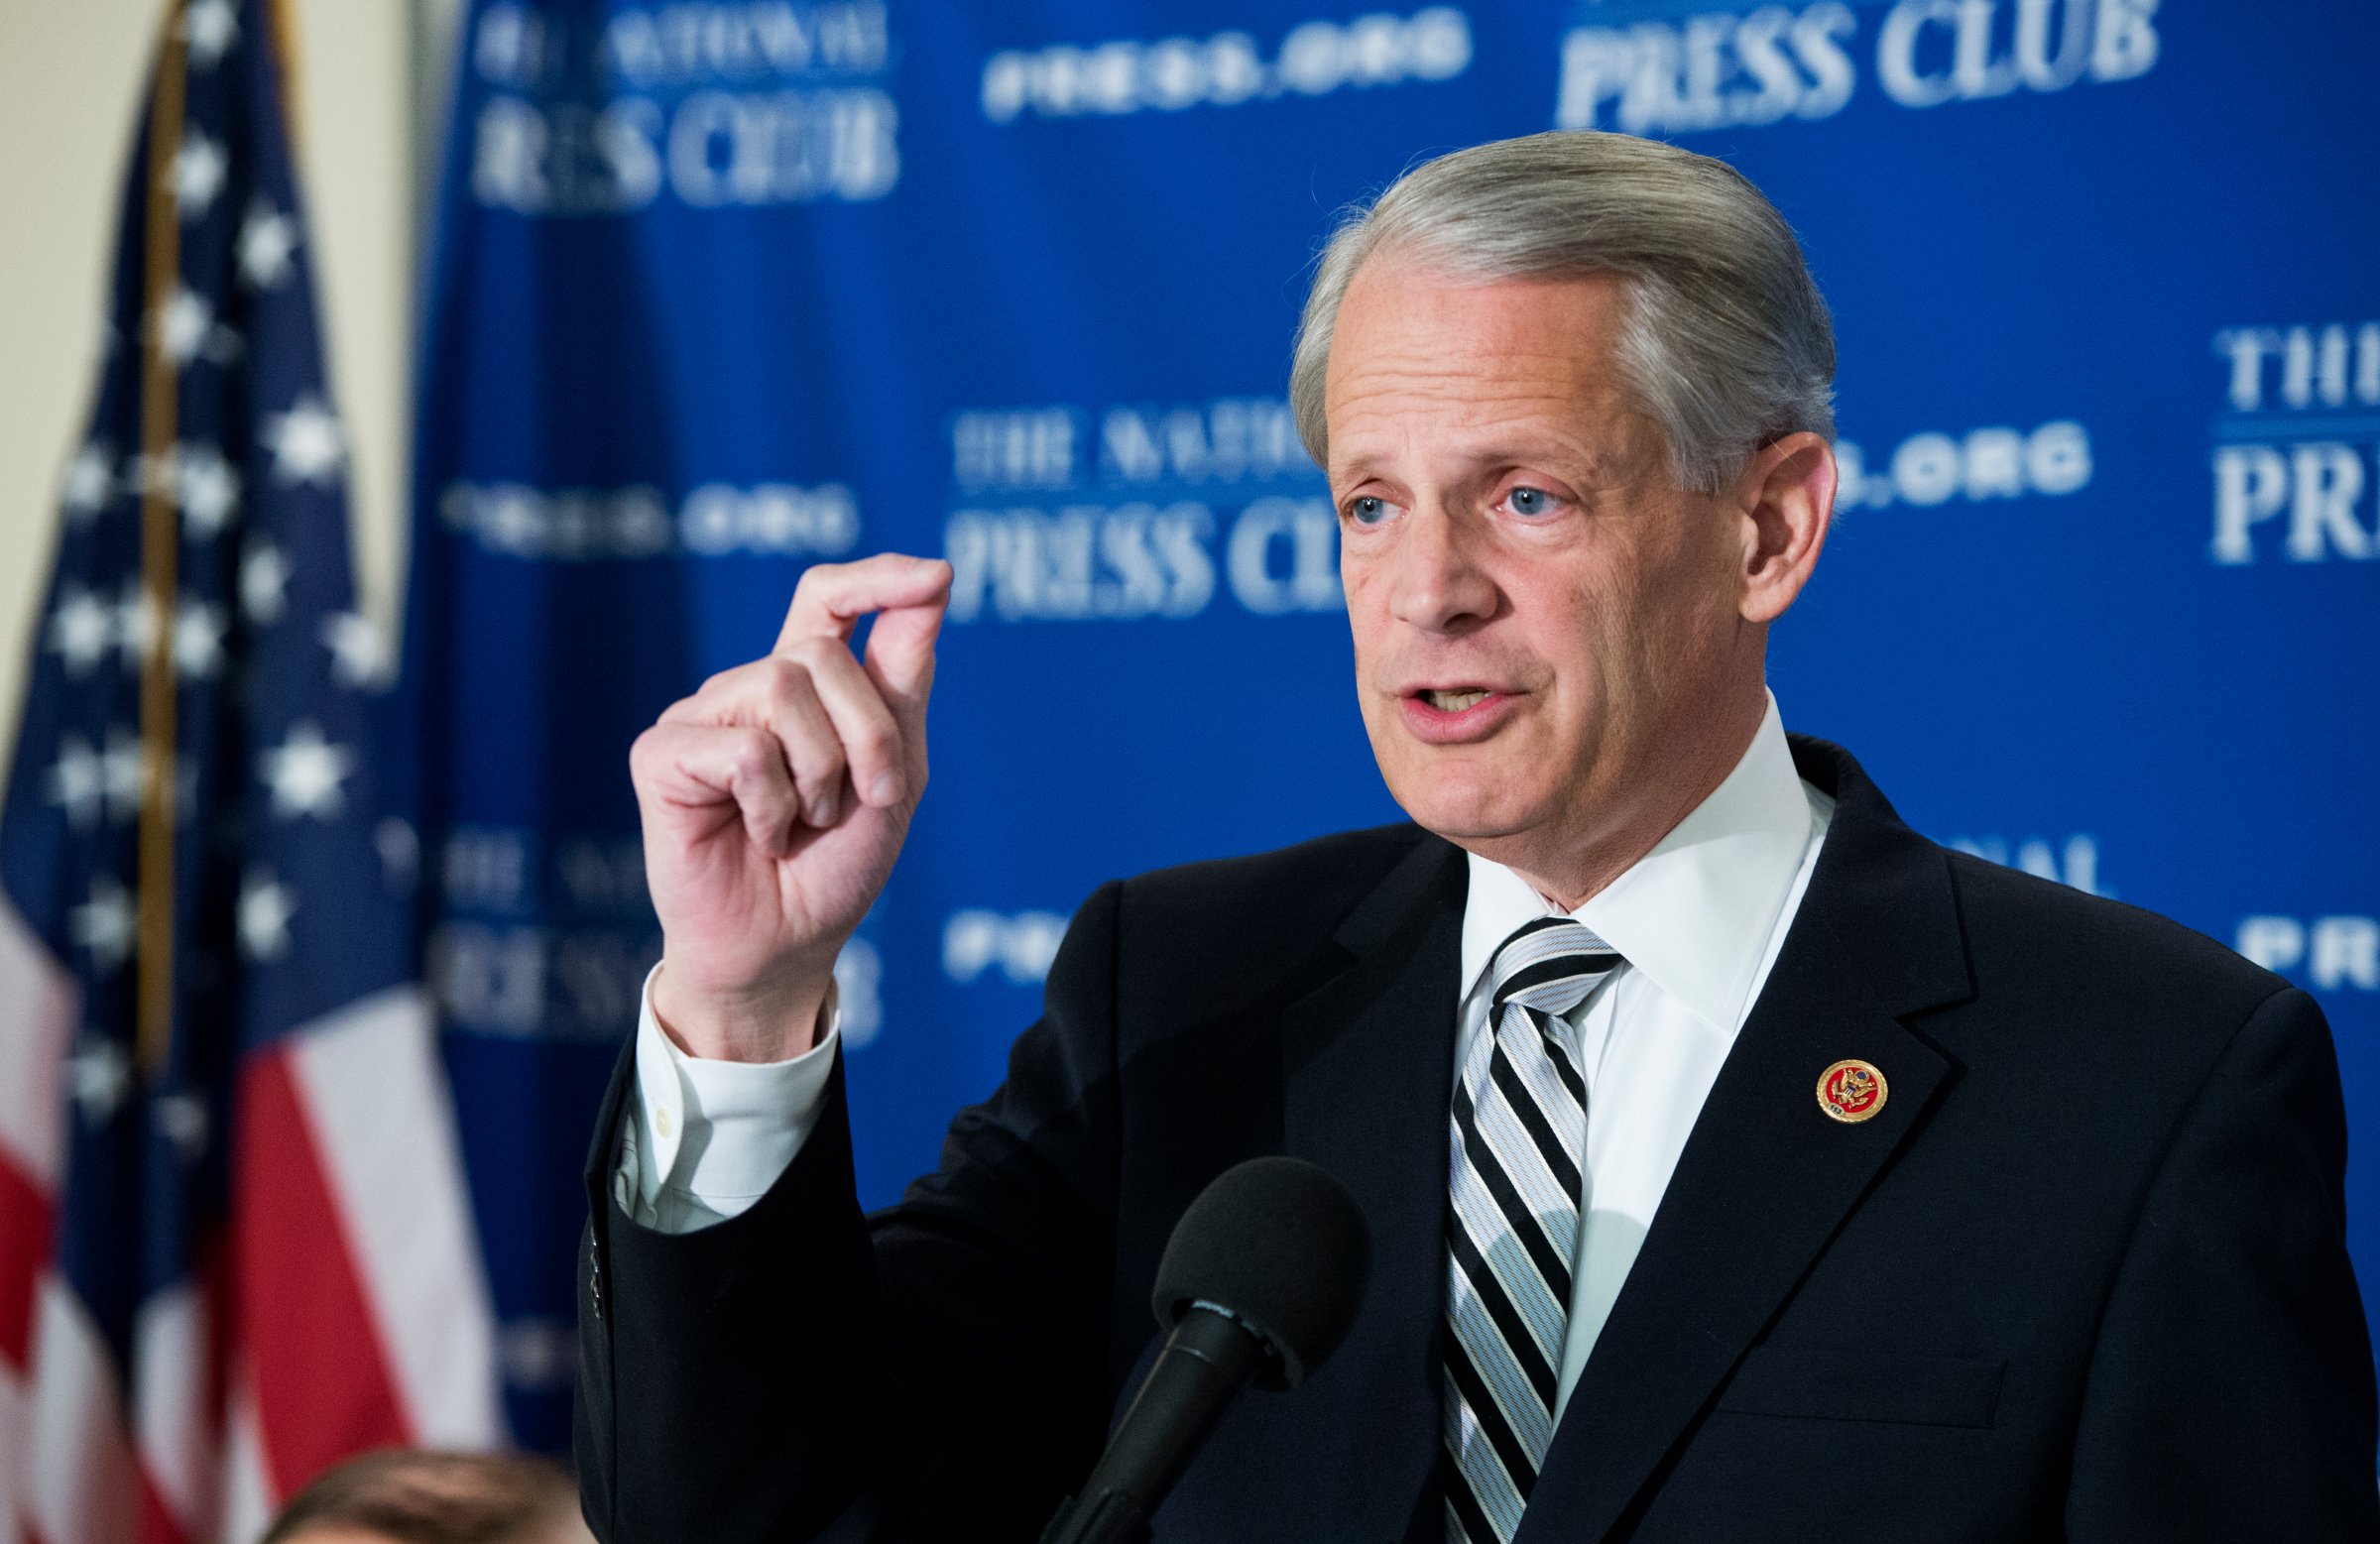 Rep. Steve Israel, D-N.Y., chairman of the DCCC, speaks at the National Press Club's Newsmaker series on how Rep. Paul Ryan's, R-Wis., budget will effect the midterm elections on April 2, 2014.